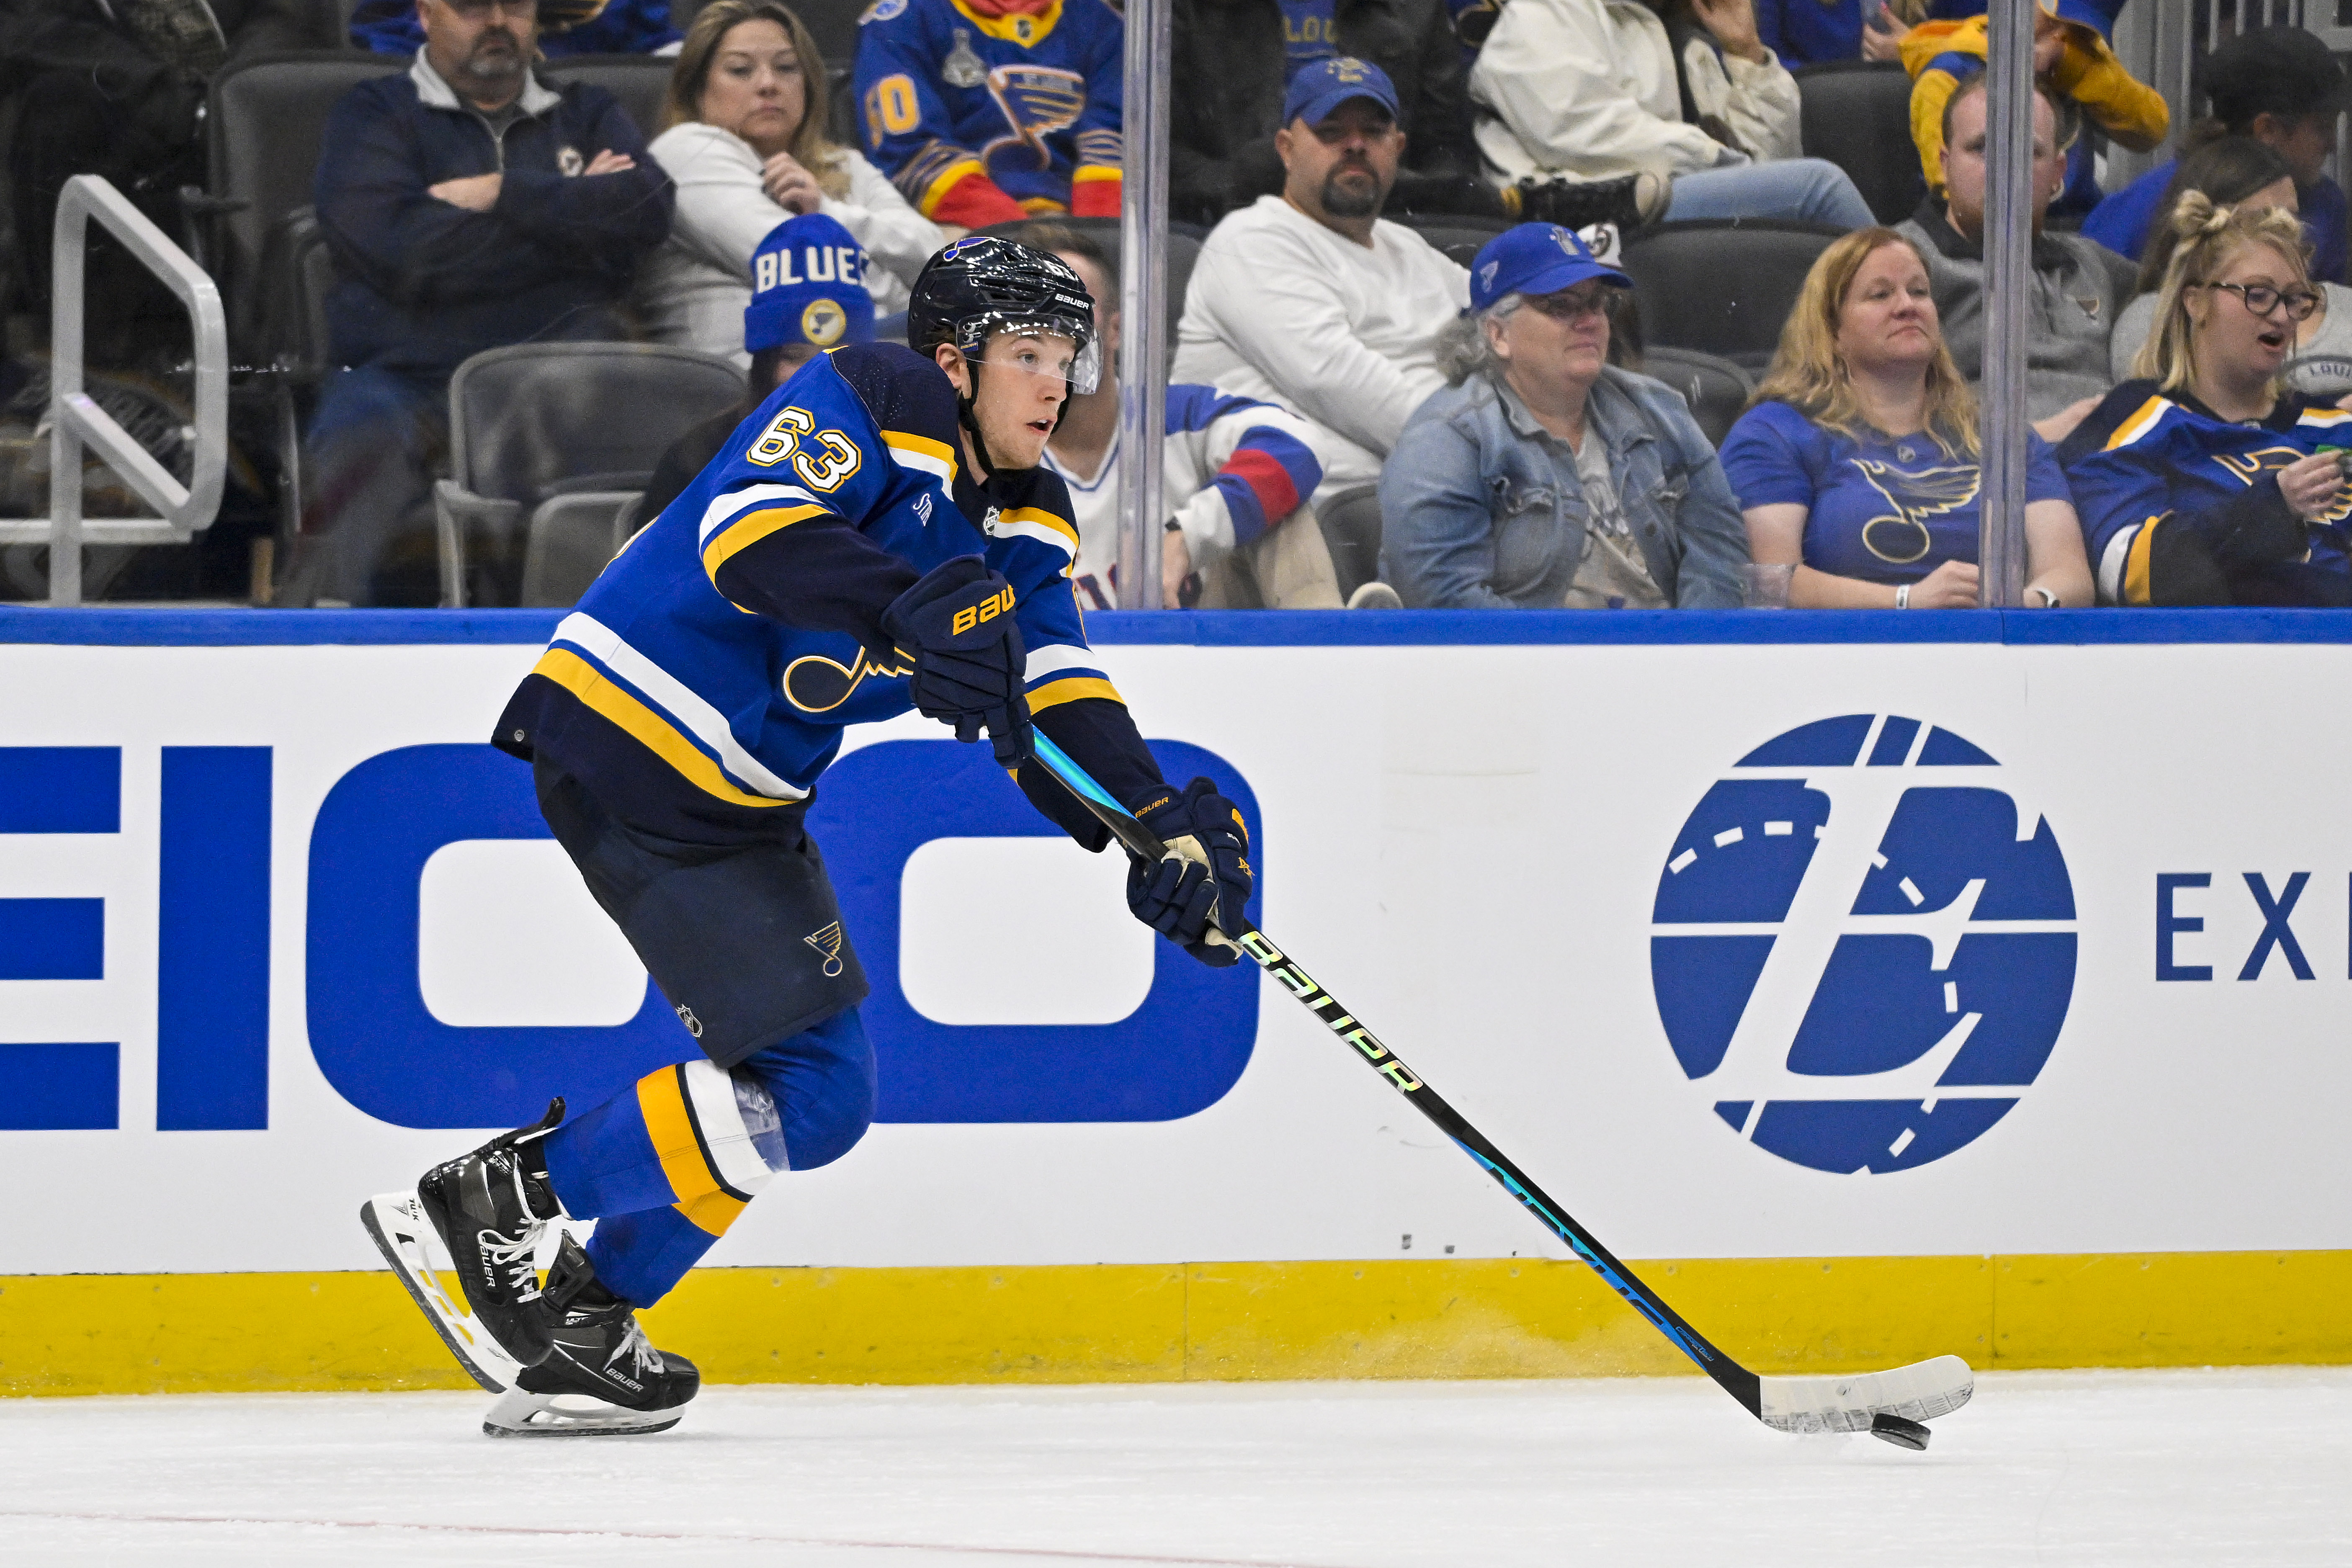 Jakub Vrána Highlights  Welcome to the St. Louis Blues 